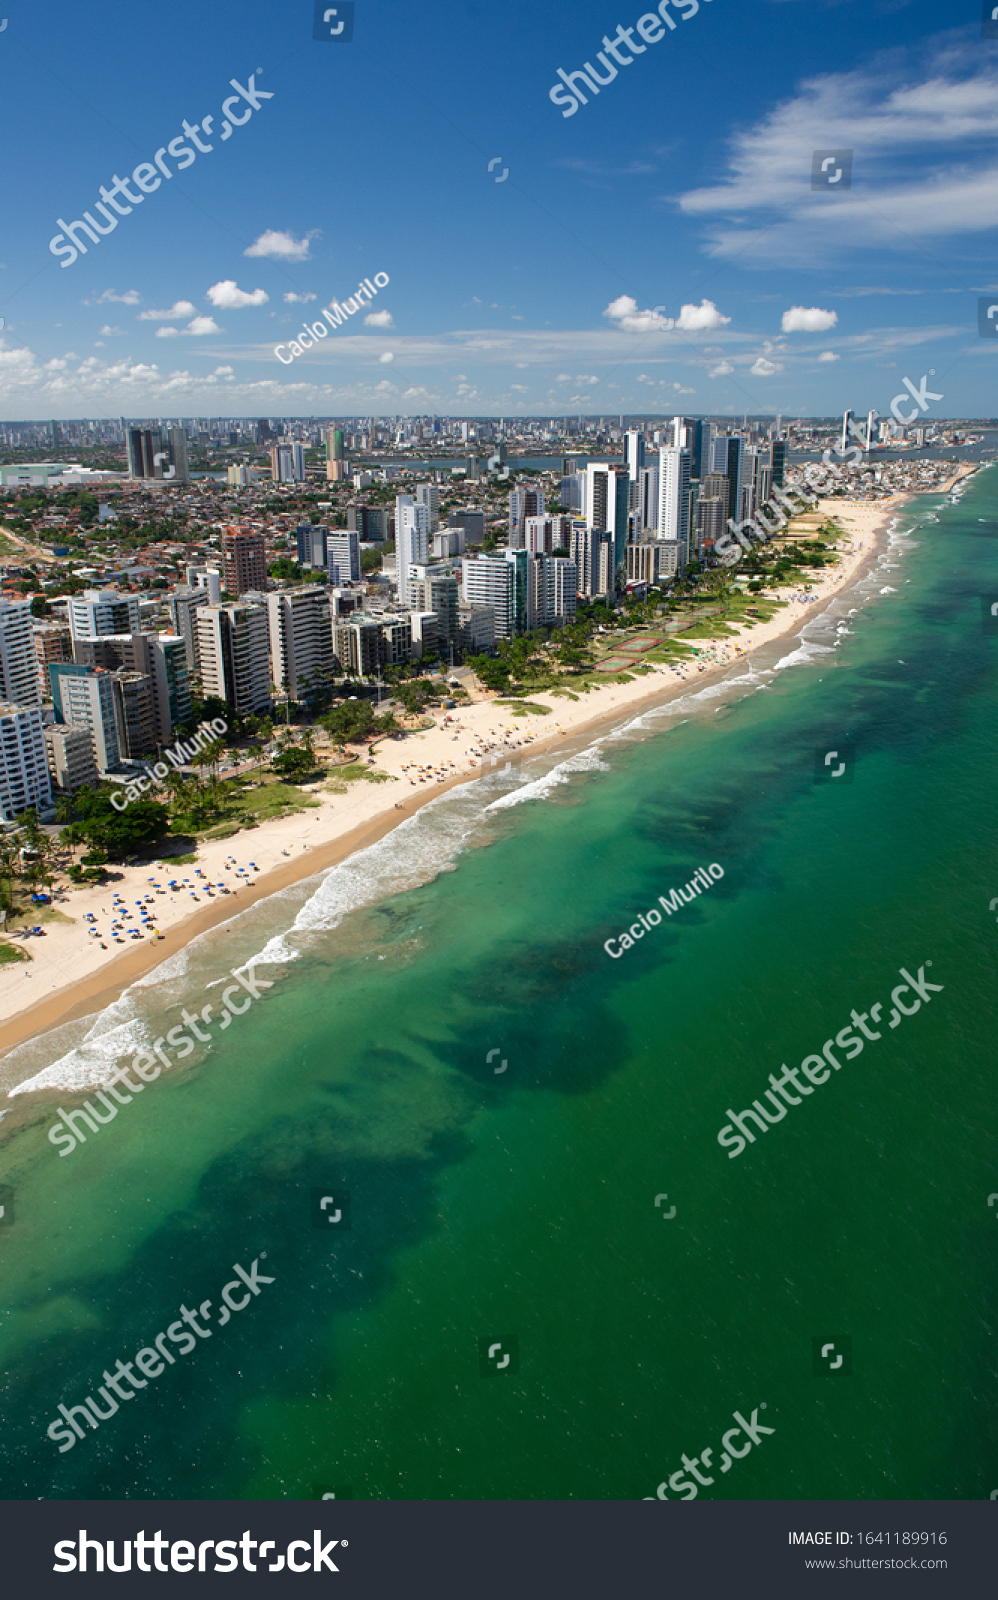 Boa Viagem Beach, Recife, Pernambuco, Brazil on March 1, 2014. The most famous urban beach in the city, approximately eight kilometers long. Aerial view. #1641189916